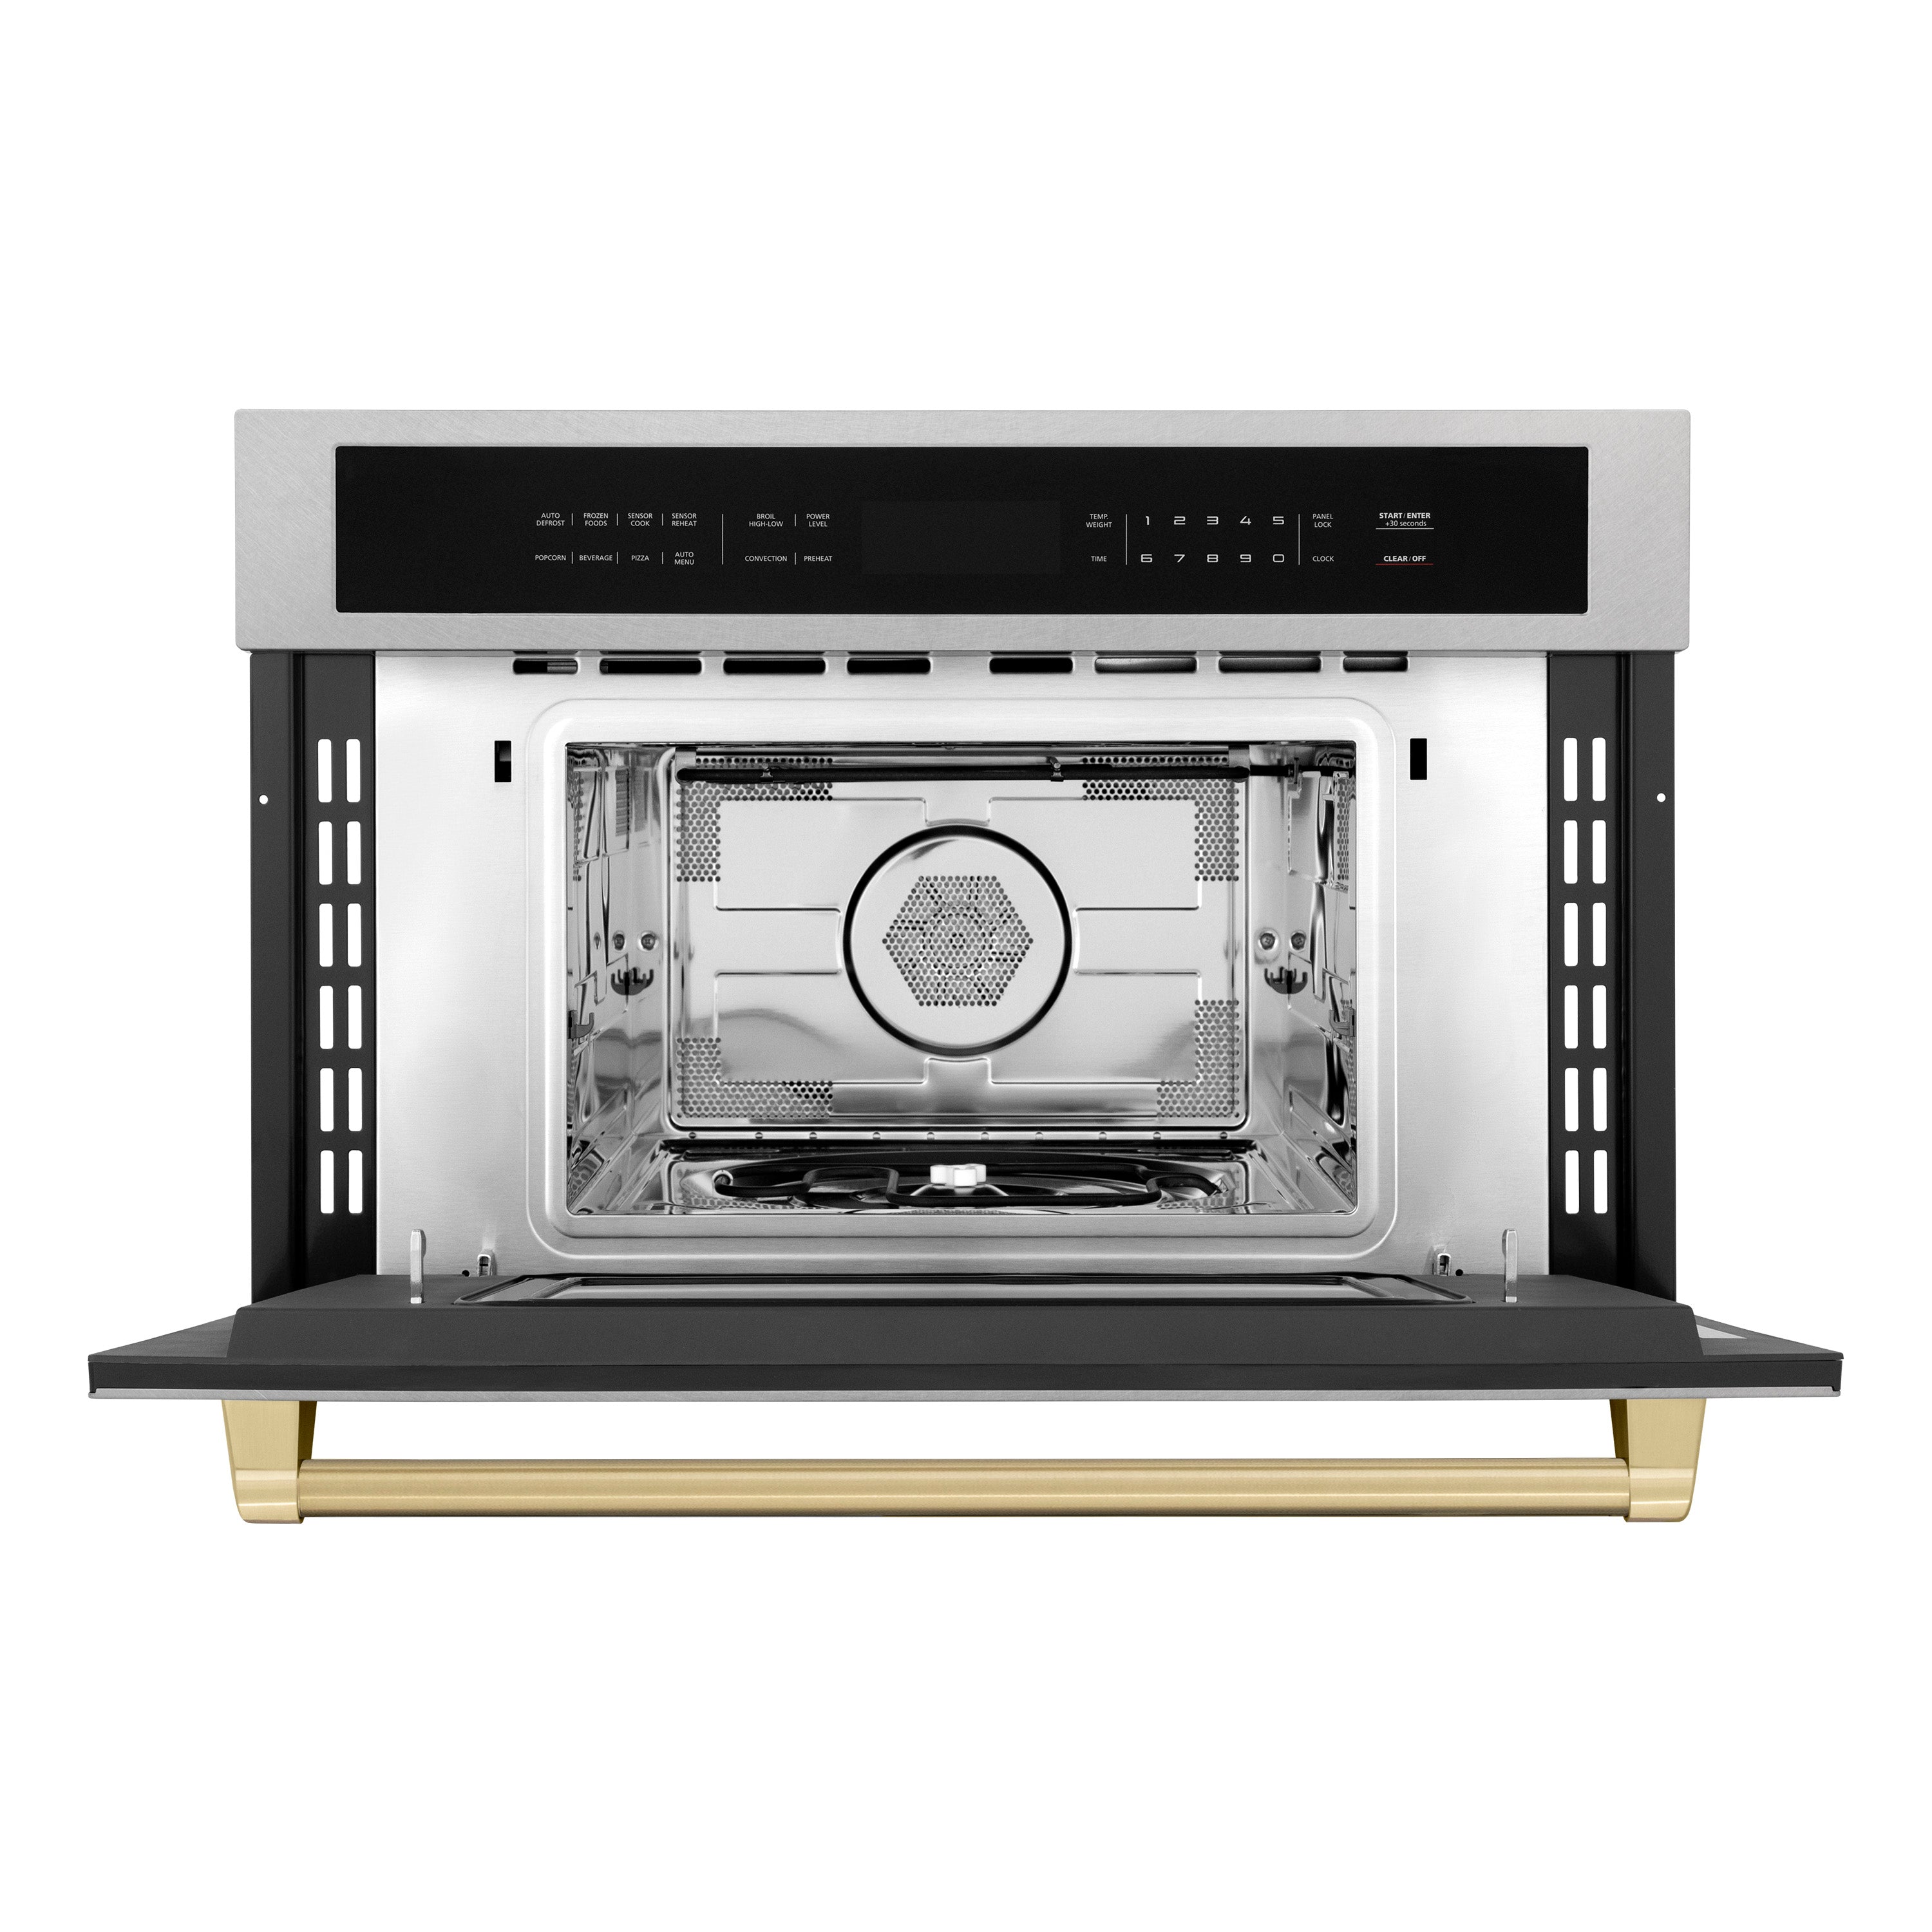 ZLINE Autograph Edition 30‚Äù 1.6 cu ft. Built-in Convection Microwave Oven in Fingerprint Resistant Stainless Steel and Champagne Bronze Accents (MWOZ-30-SS-CB)